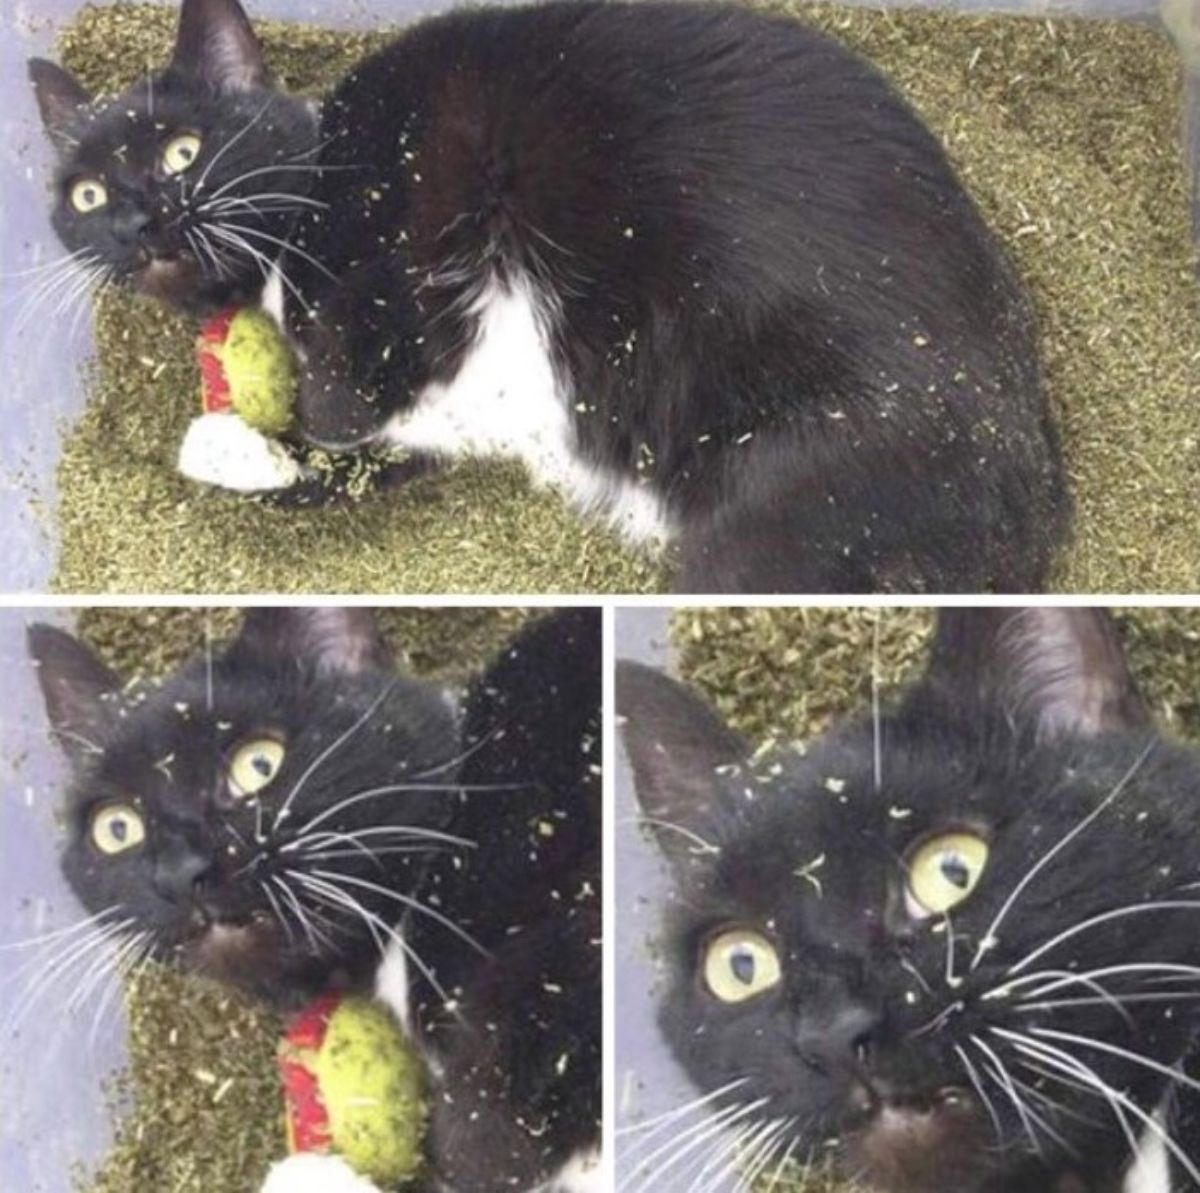 3 photos of a black and white cat laying on catnip